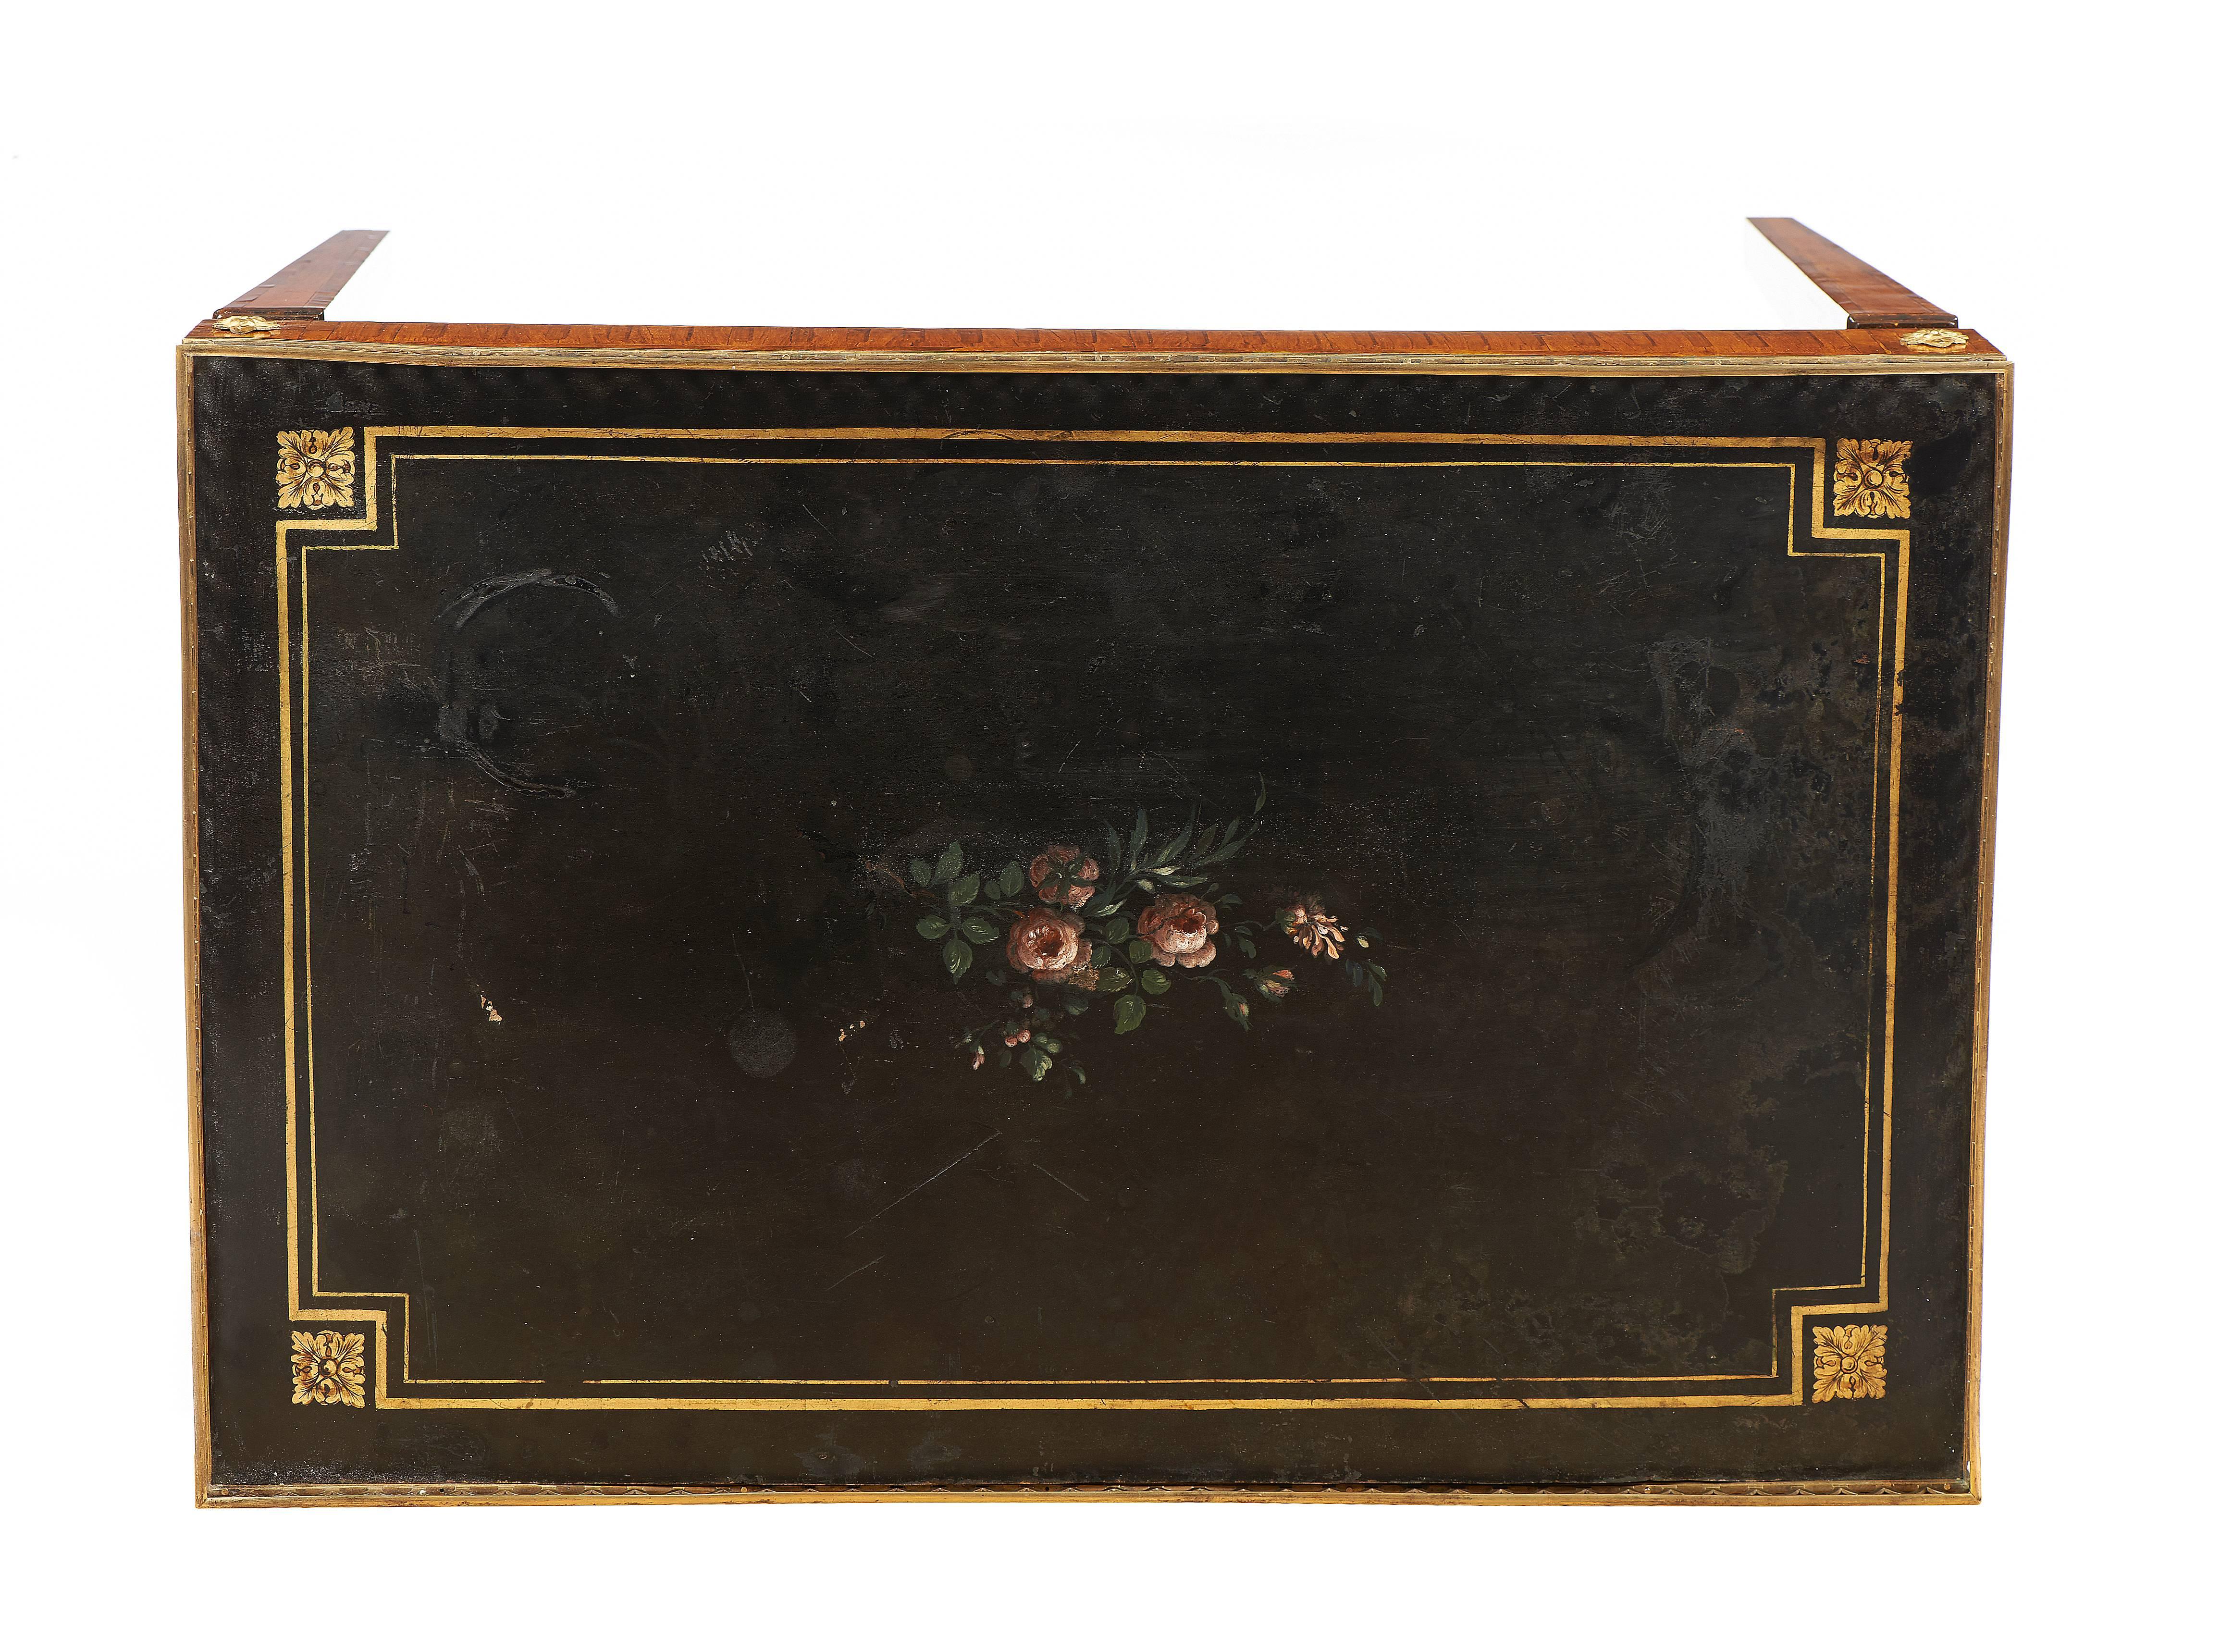 For sale on 1stdibs an 18th Century Russian Tea Table on Walnut is from Catherine's The Great period and presents a metal top painted with black background decorated with gilt border and flowers in the center. The structure respects the trend of the